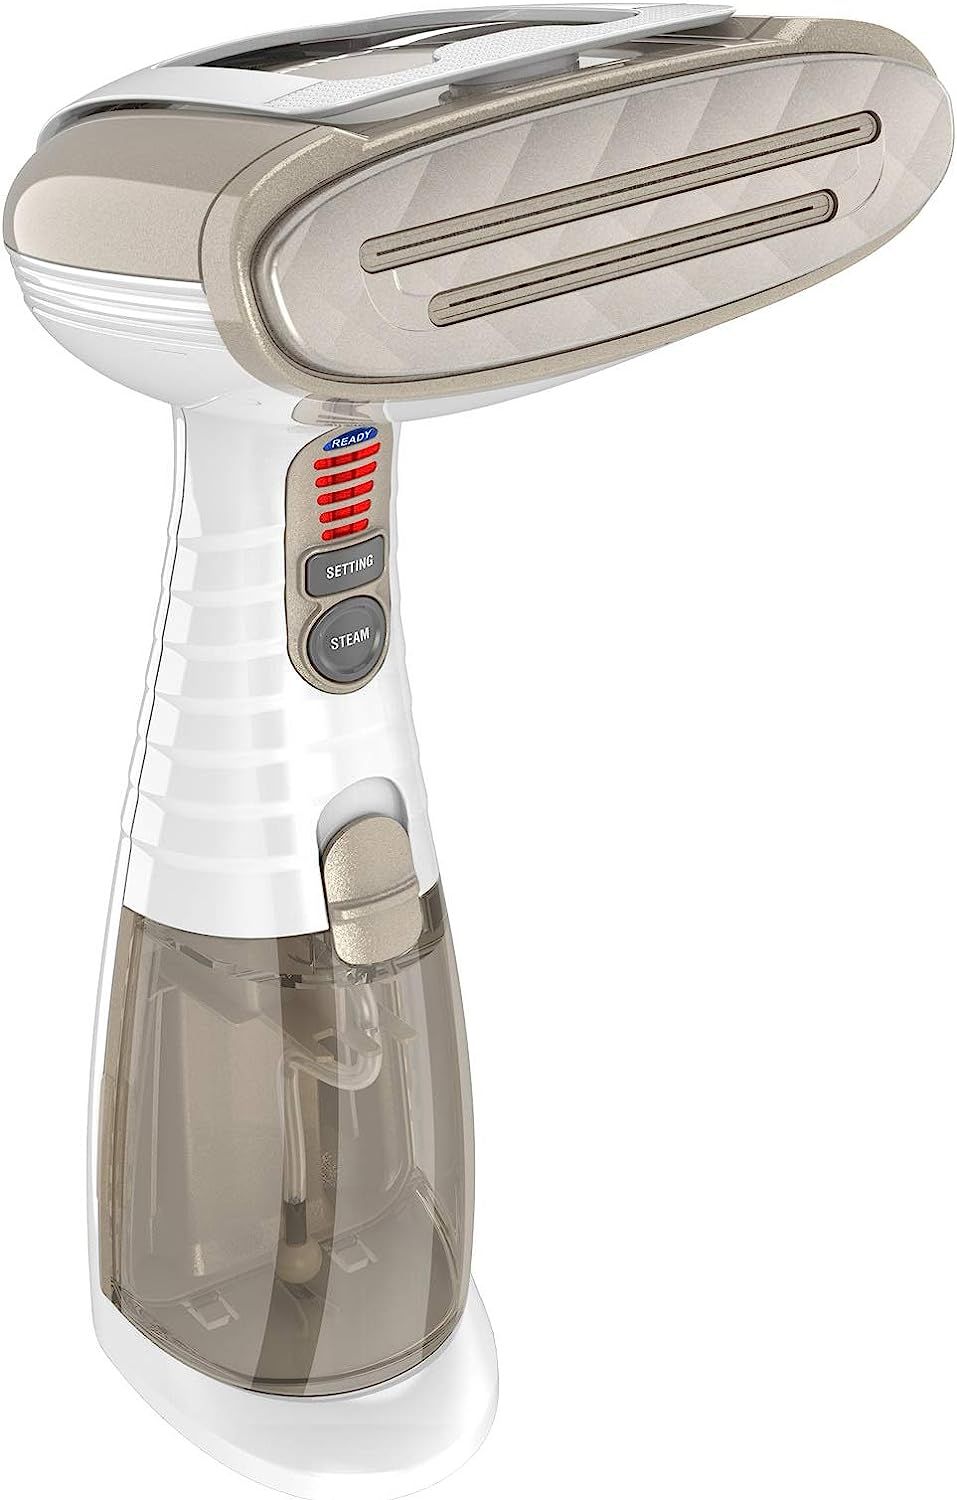 Conair Turbo ExtremeSteam Hand Held Fabric Steamer, White/Champagne | Amazon (US)